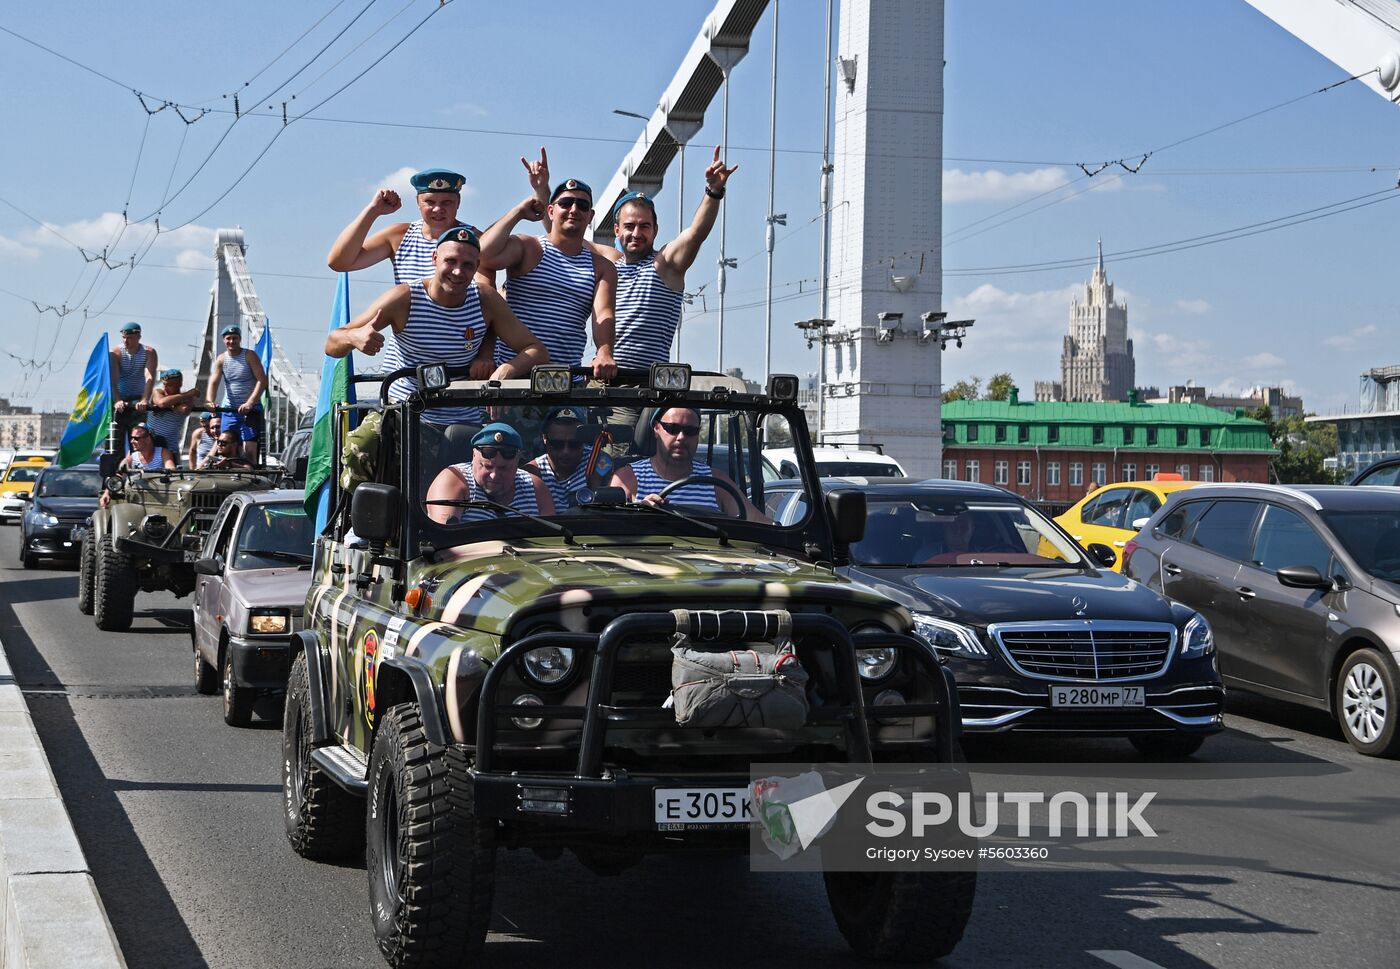 Paratroopers Day celebrations in Moscow